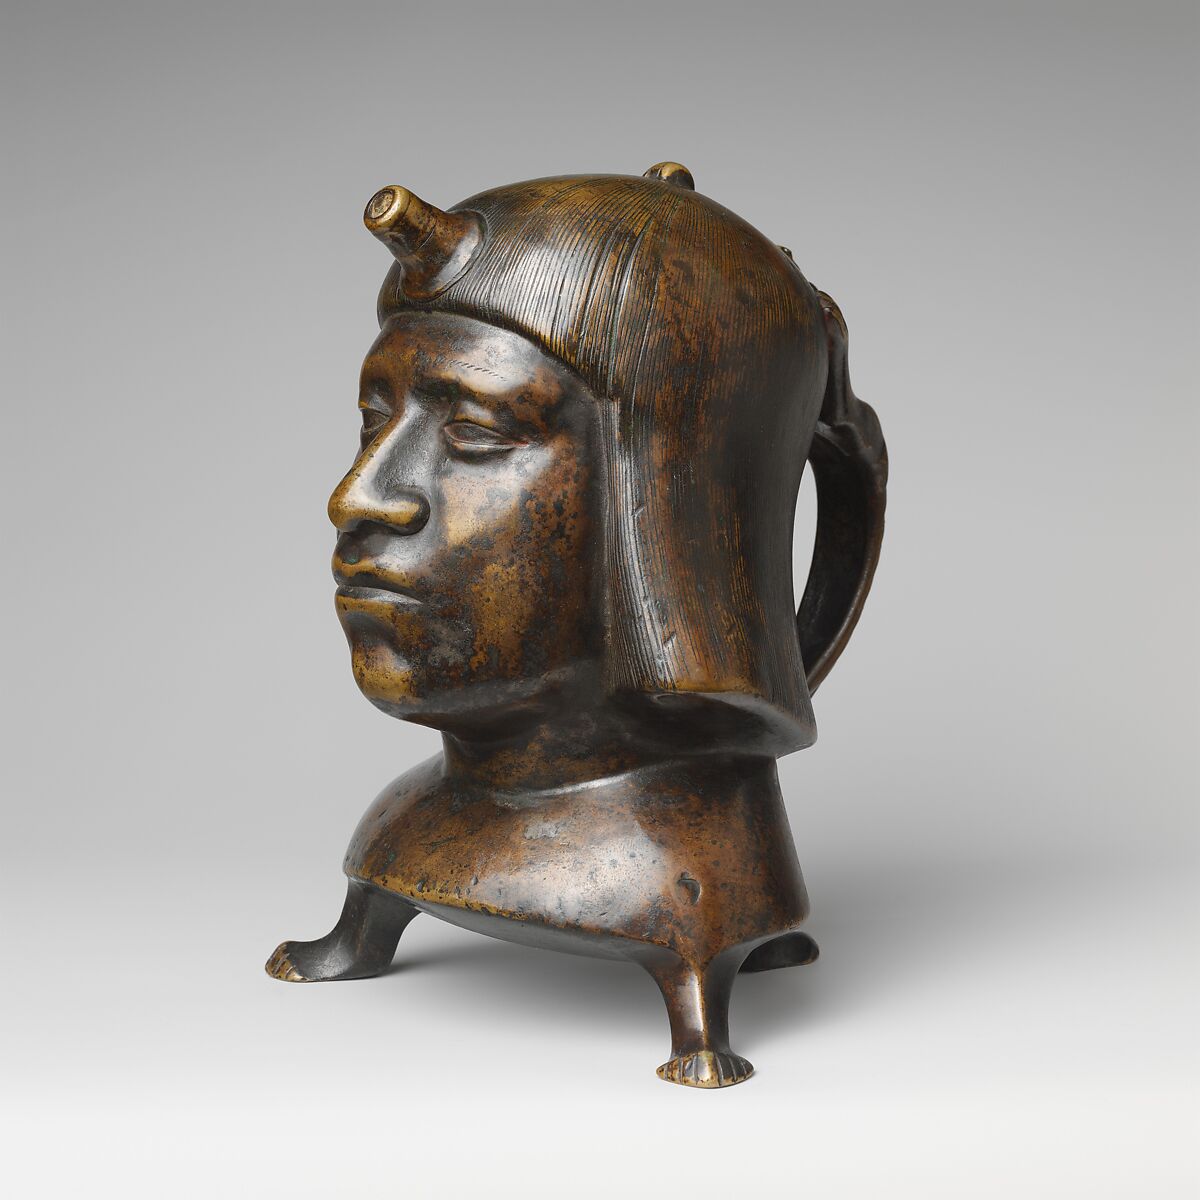 Aquamanile in the Form of a Human Head, Bronze; Ternary copper alloy with a very high percentage of zinc (approx. 68% copper,
approx. 26% zinc, approx. 4% tin), covered with a thin black lacquer patina; traces of cinnabar have been detected on the interior and exterior of the vessel., German or French, Paris (in fourteenth-century Hildesheim style) 